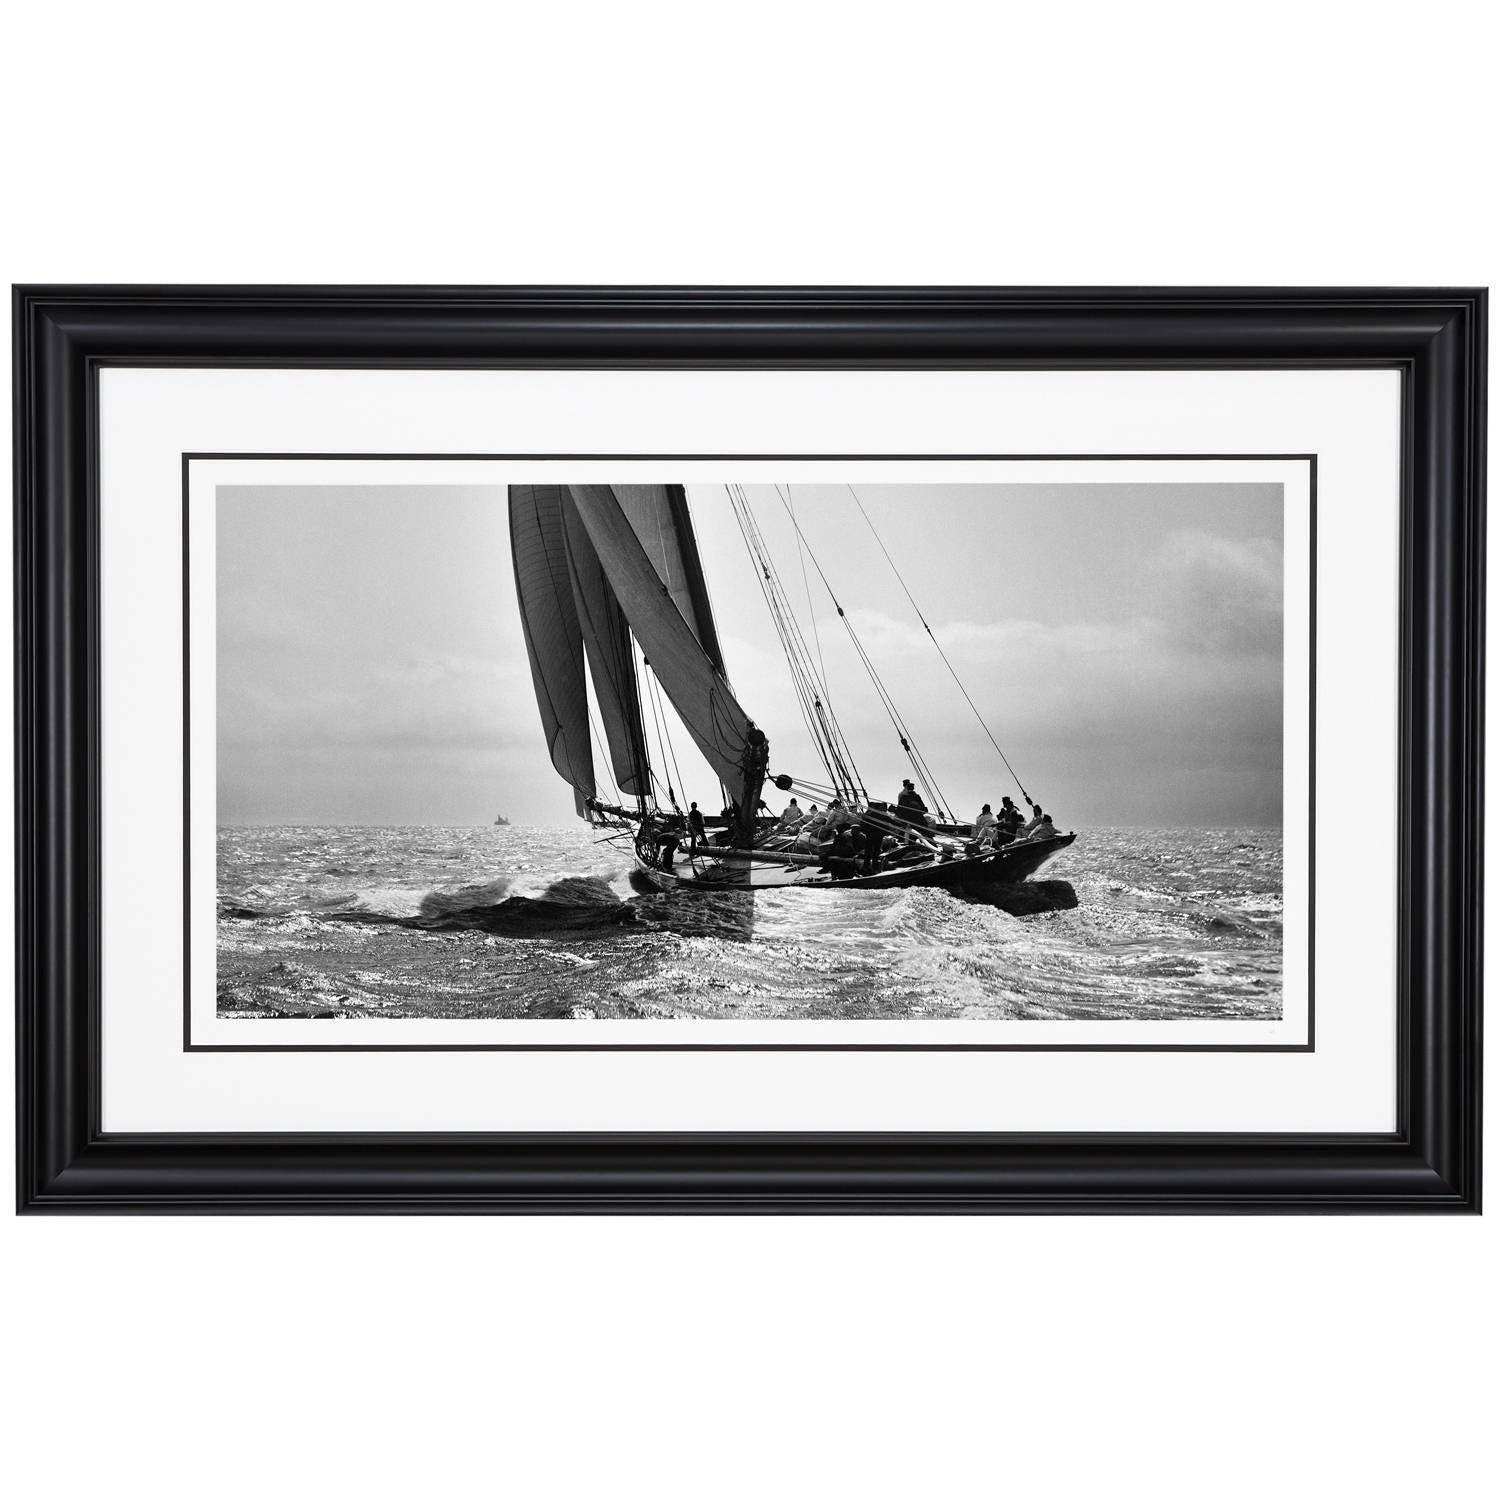 Prince of Wales Sailing Yacht Britannia, August 1894 - Photograph by Alfred John West